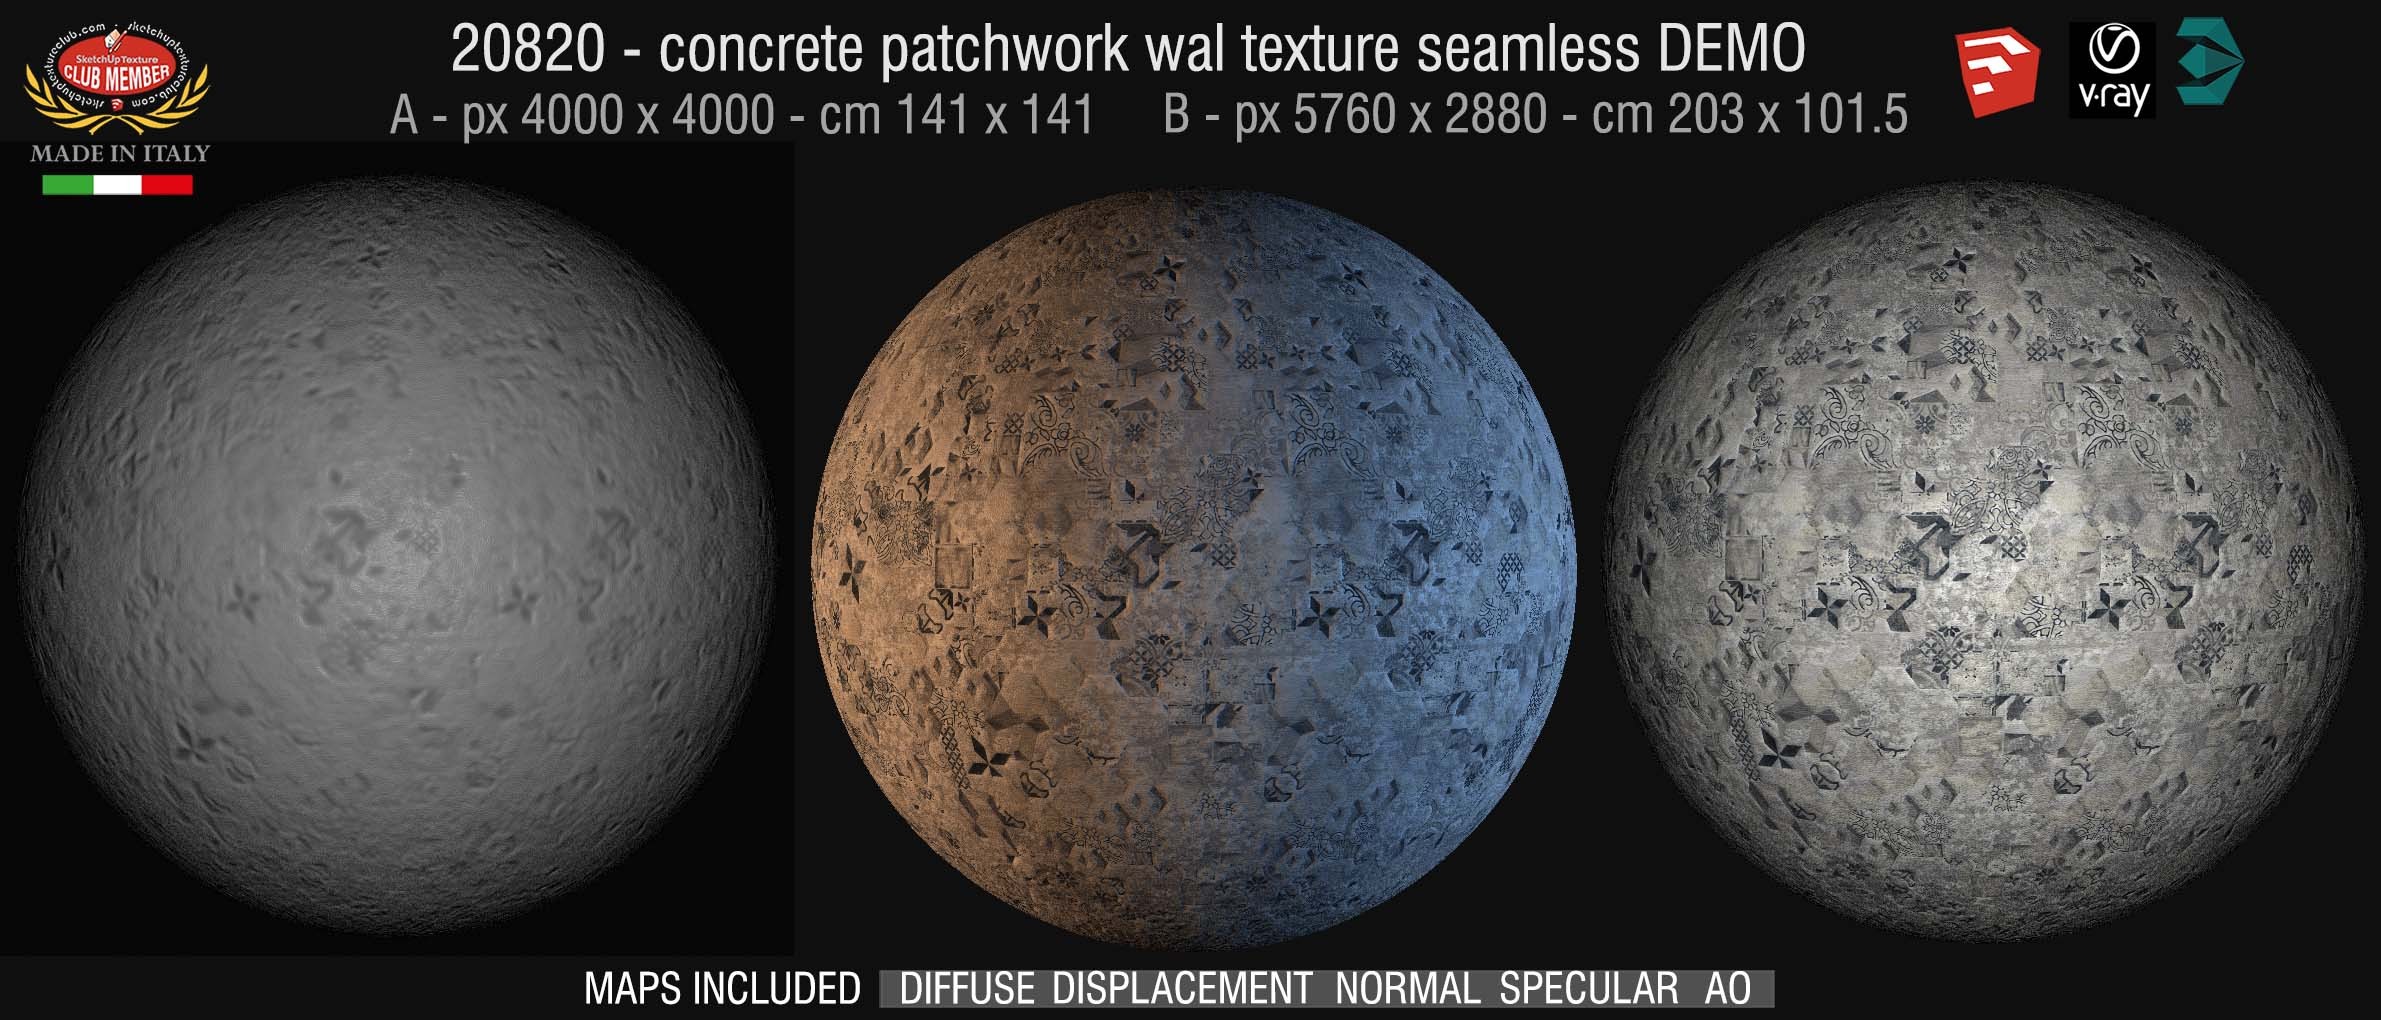 20818 HR Concrete patchwork wall texture seamless + maps DEMO